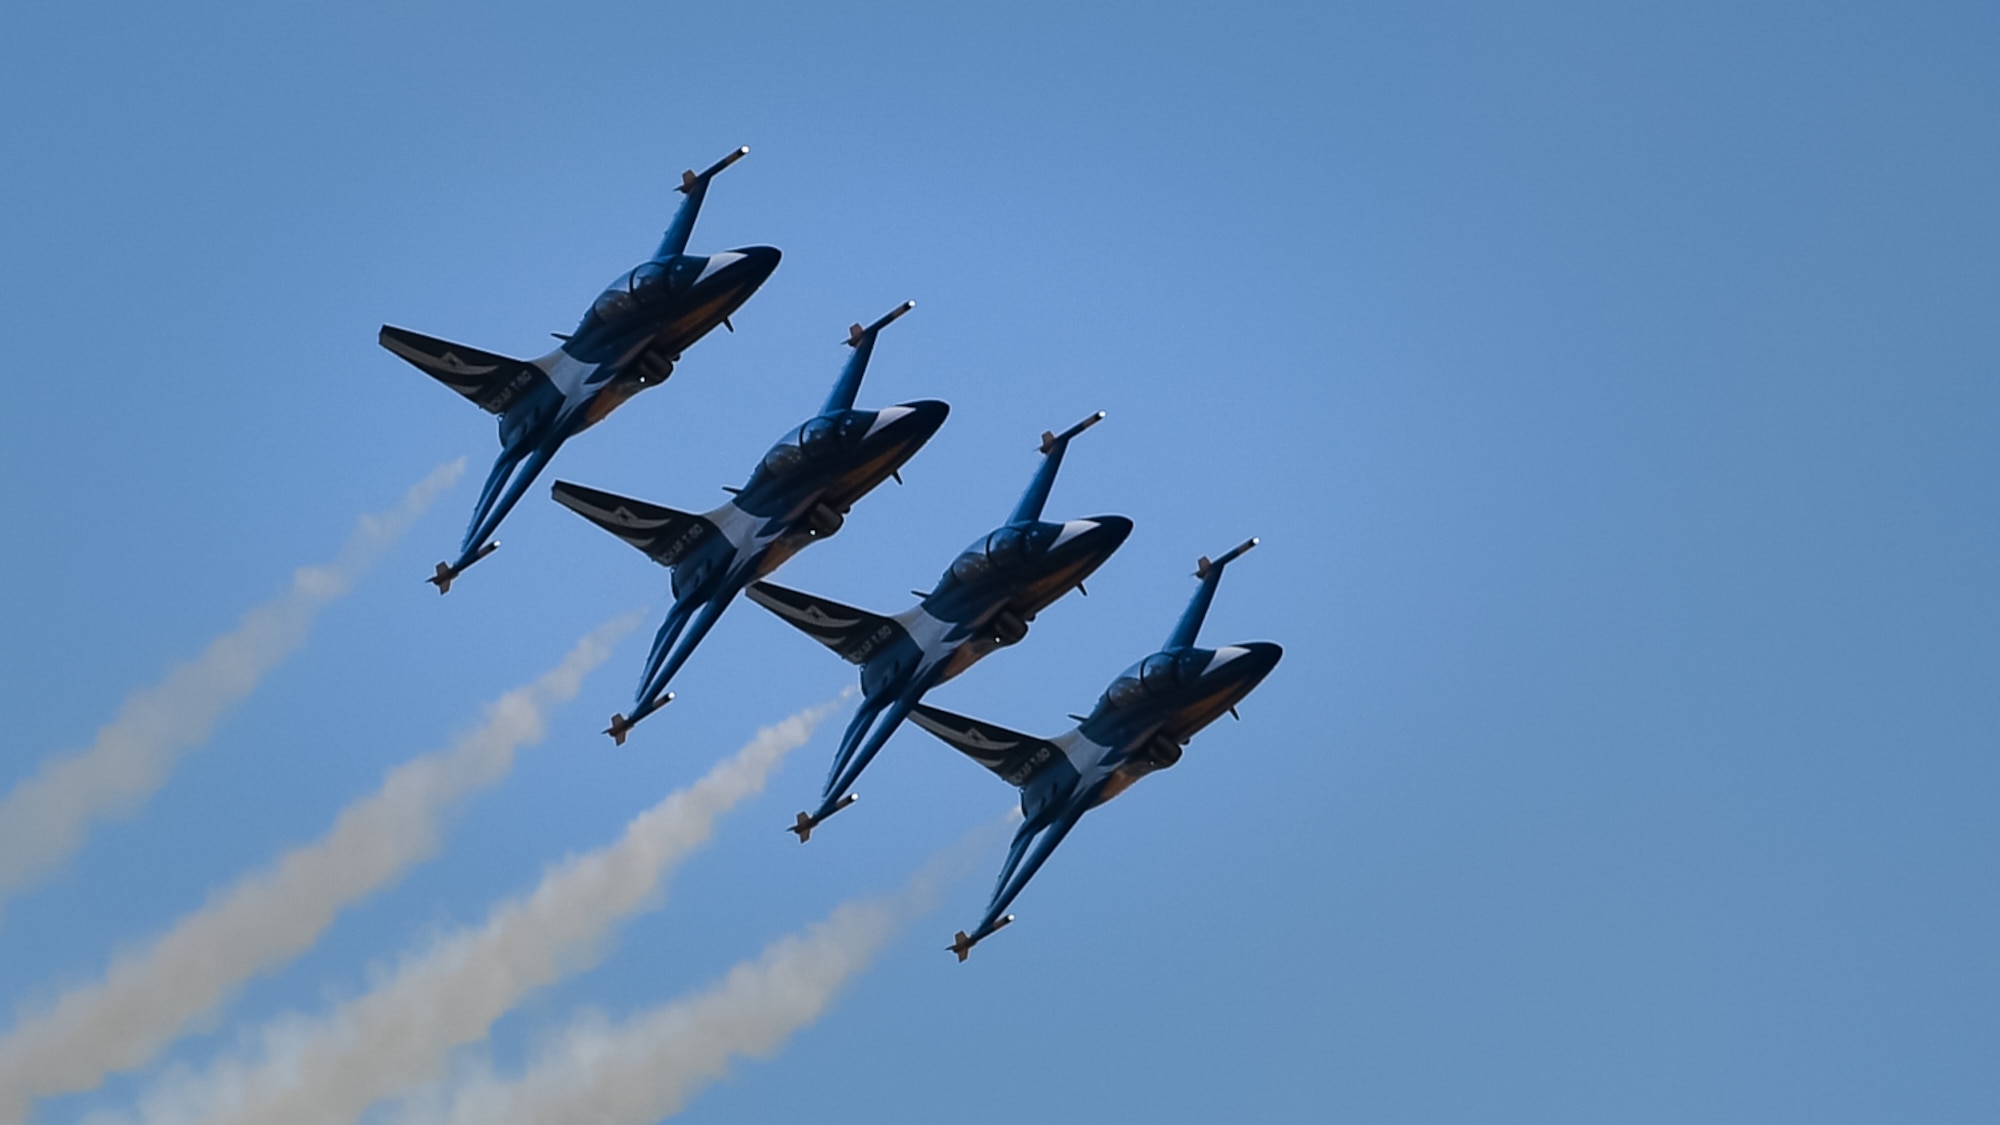 The Republic of Korea Air Force’s 53rd Demonstration Group, the Black Eagles, perform at the Gyeongnam Sacheon Aerospace Expo at Sacheon Air Base, South Korea, Oct. 25, 2018.